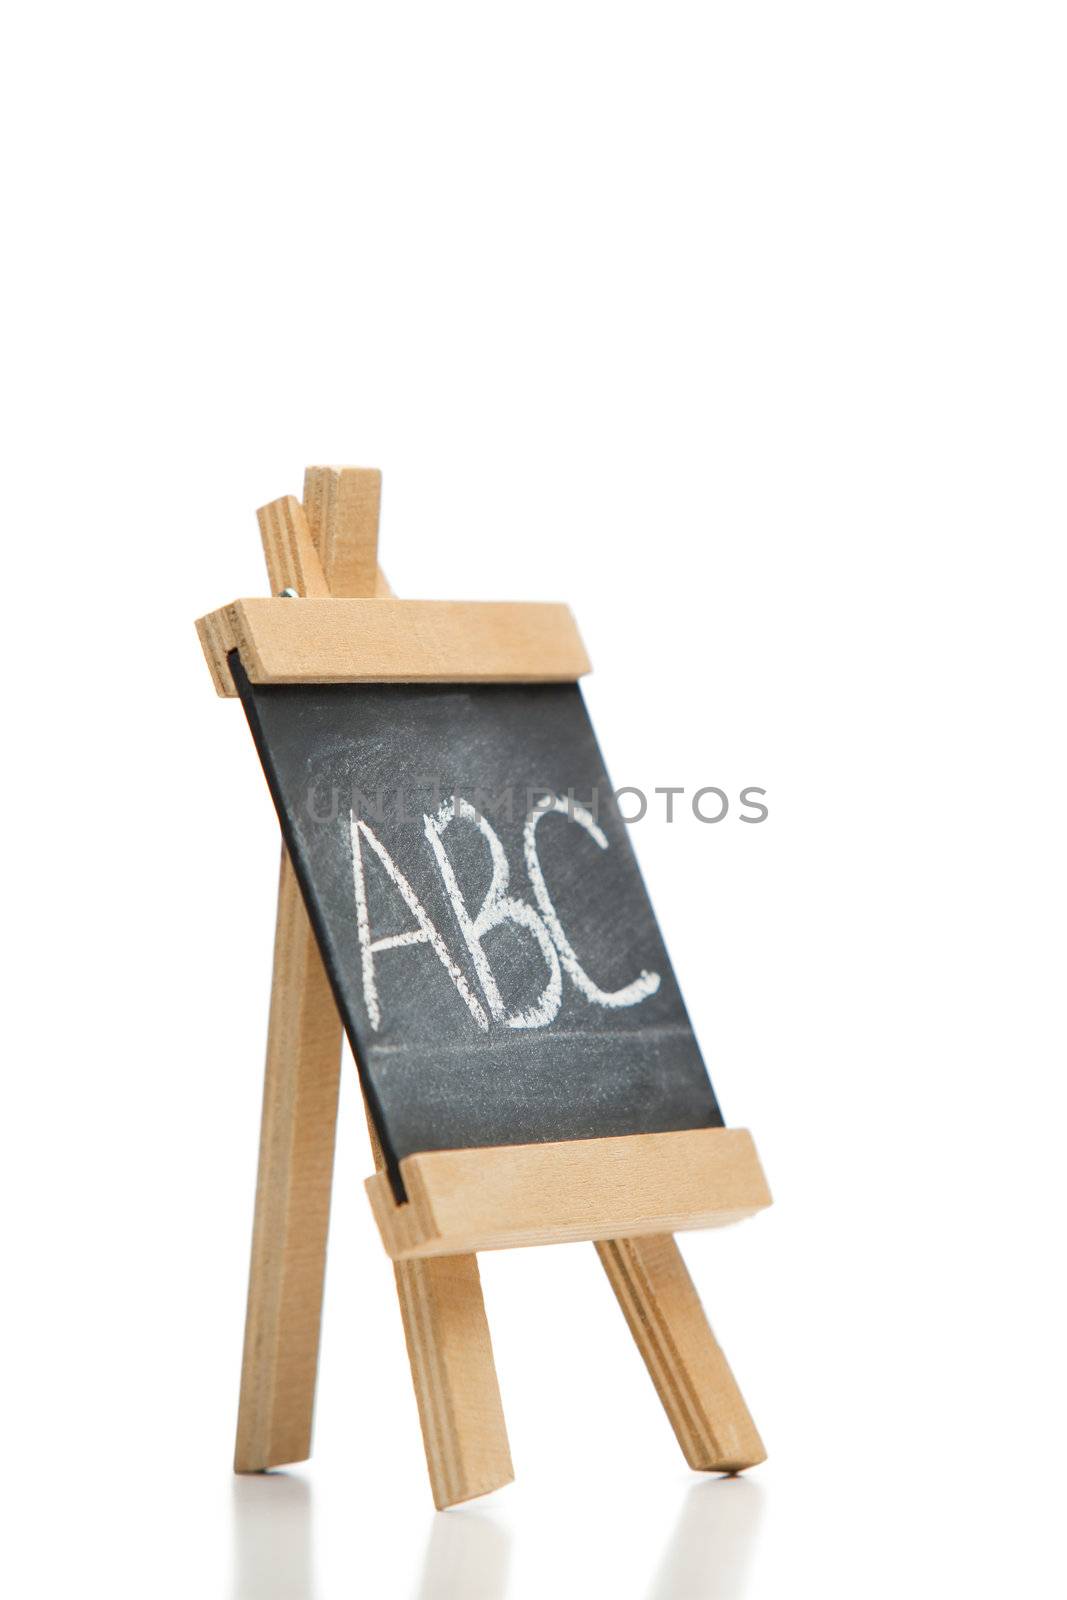 Angled chalkboard with the letters abc written on it isolated against a white background